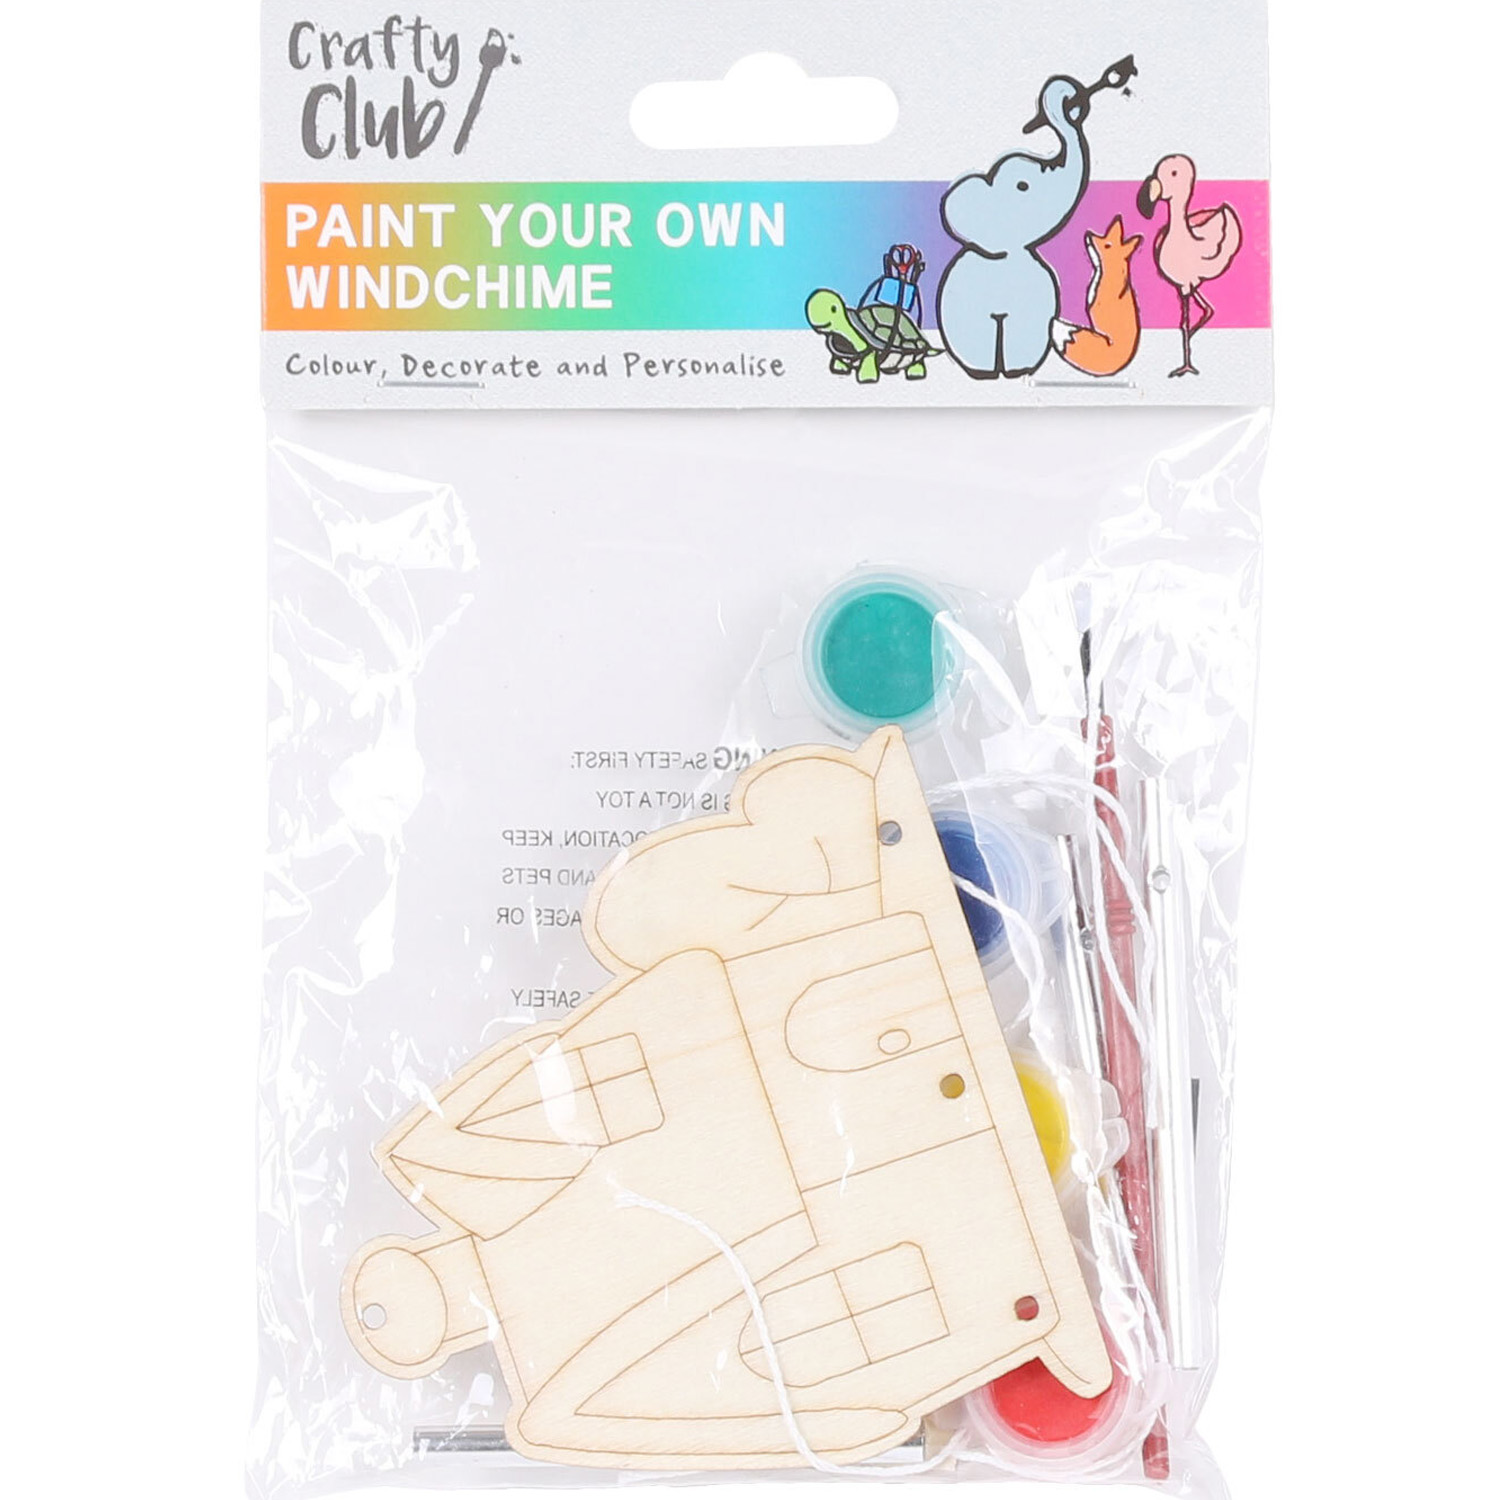 Single Crafty Club Paint Your Own Windchime Kit in Assorted styles Image 1